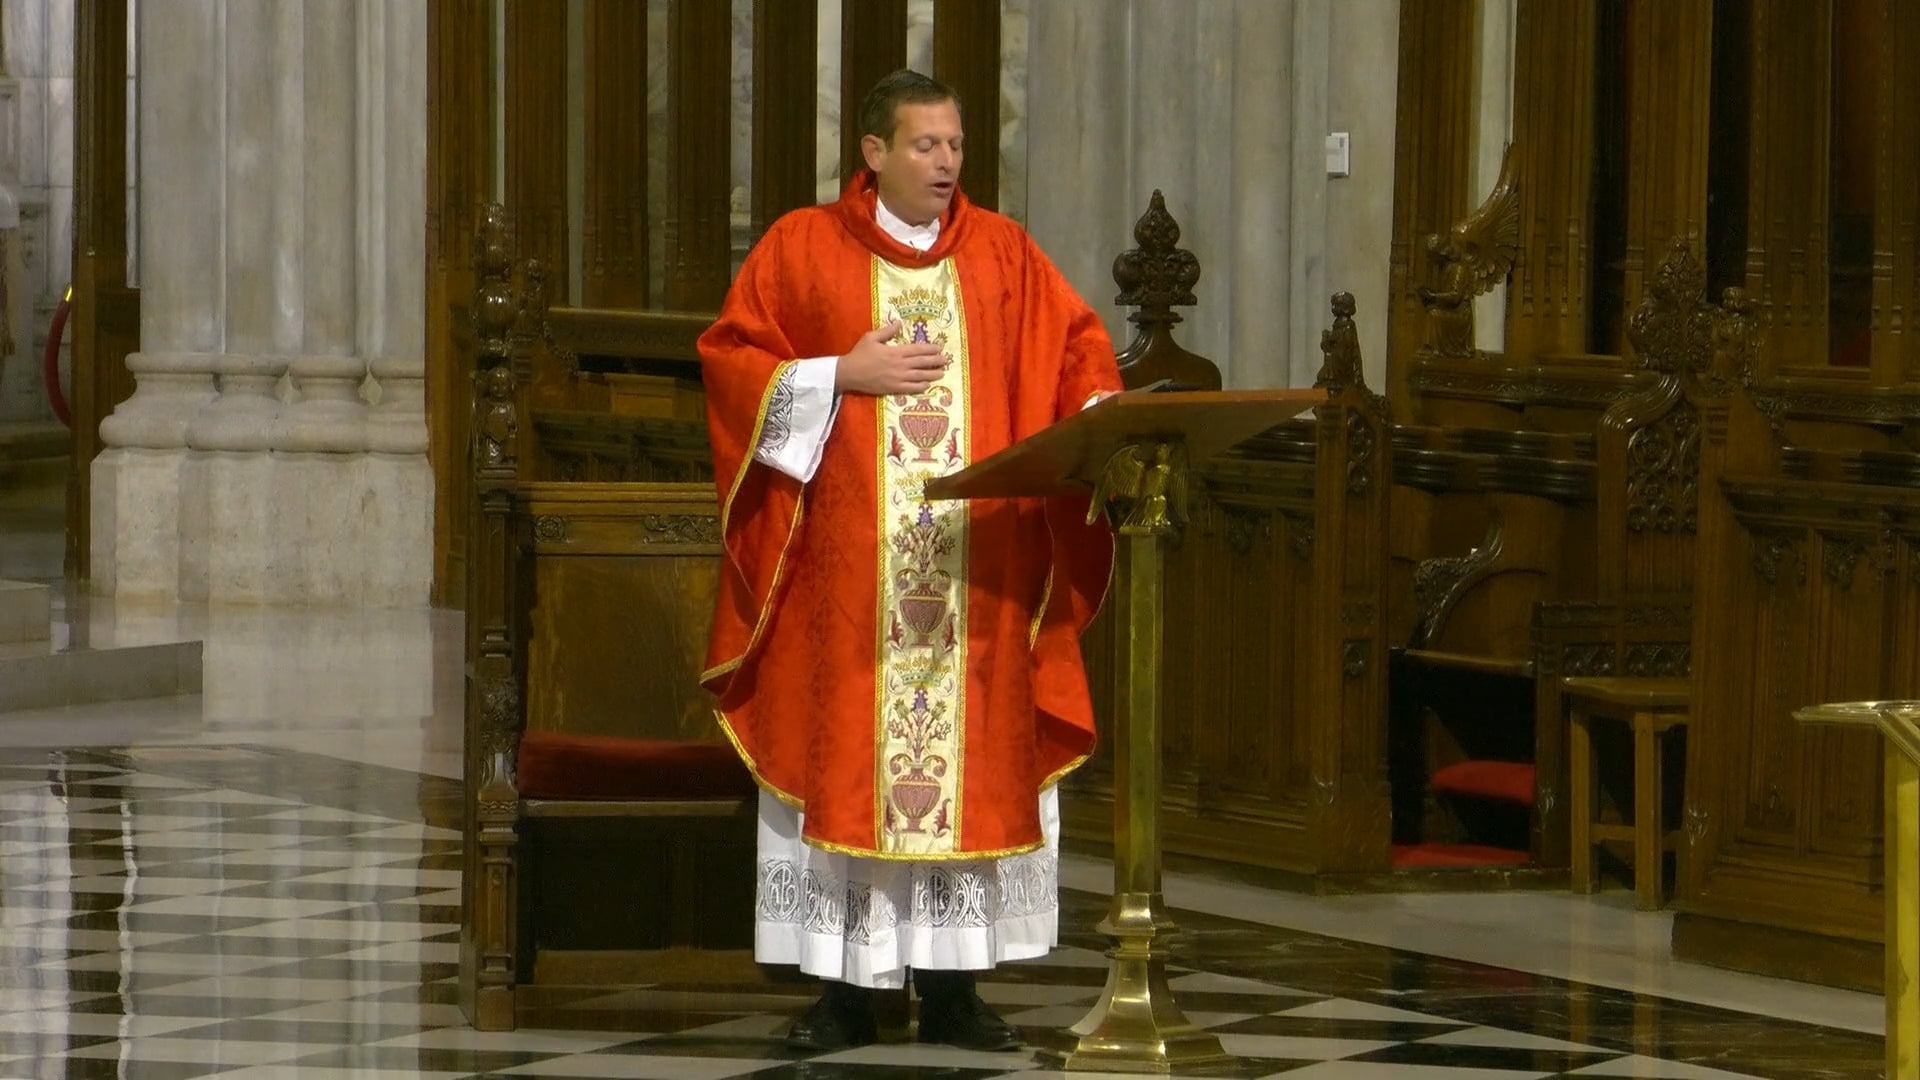 Mass from St. Patrick's Cathedral - September 19, 2022